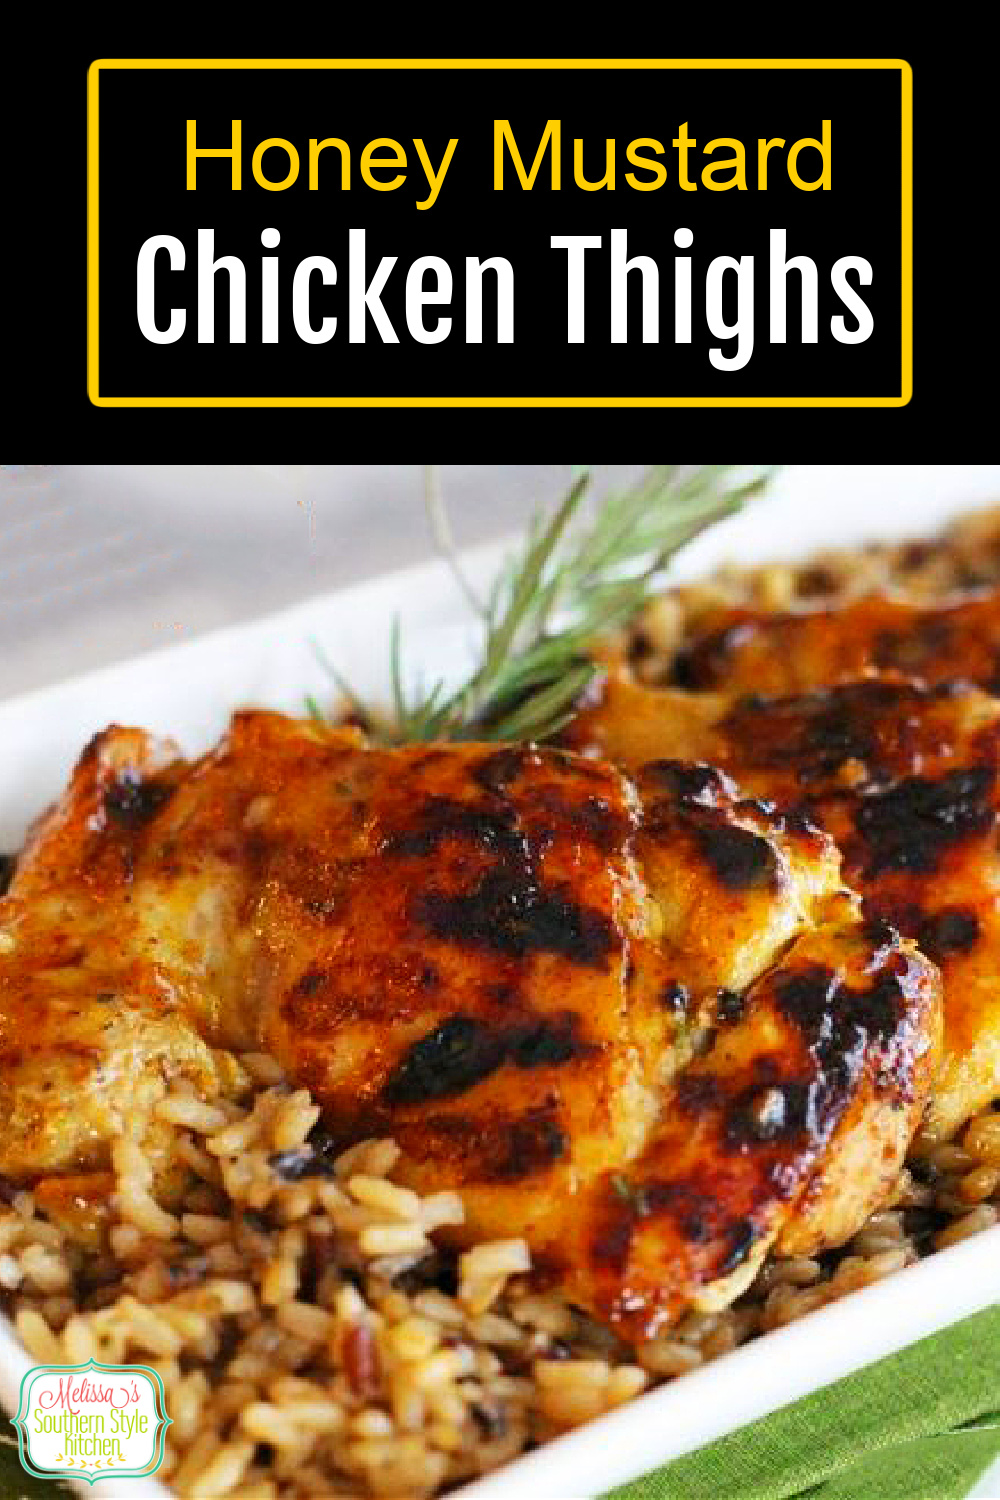 30 minute entrees like these Honey Mustard Glazed Chicken Thighs make a delicious weekday meal #honeymustardchicken #chickenthighs #chickenrecipes #chickenthighsrecipe #grilledchicken #easychickenthighs via @melissasssk